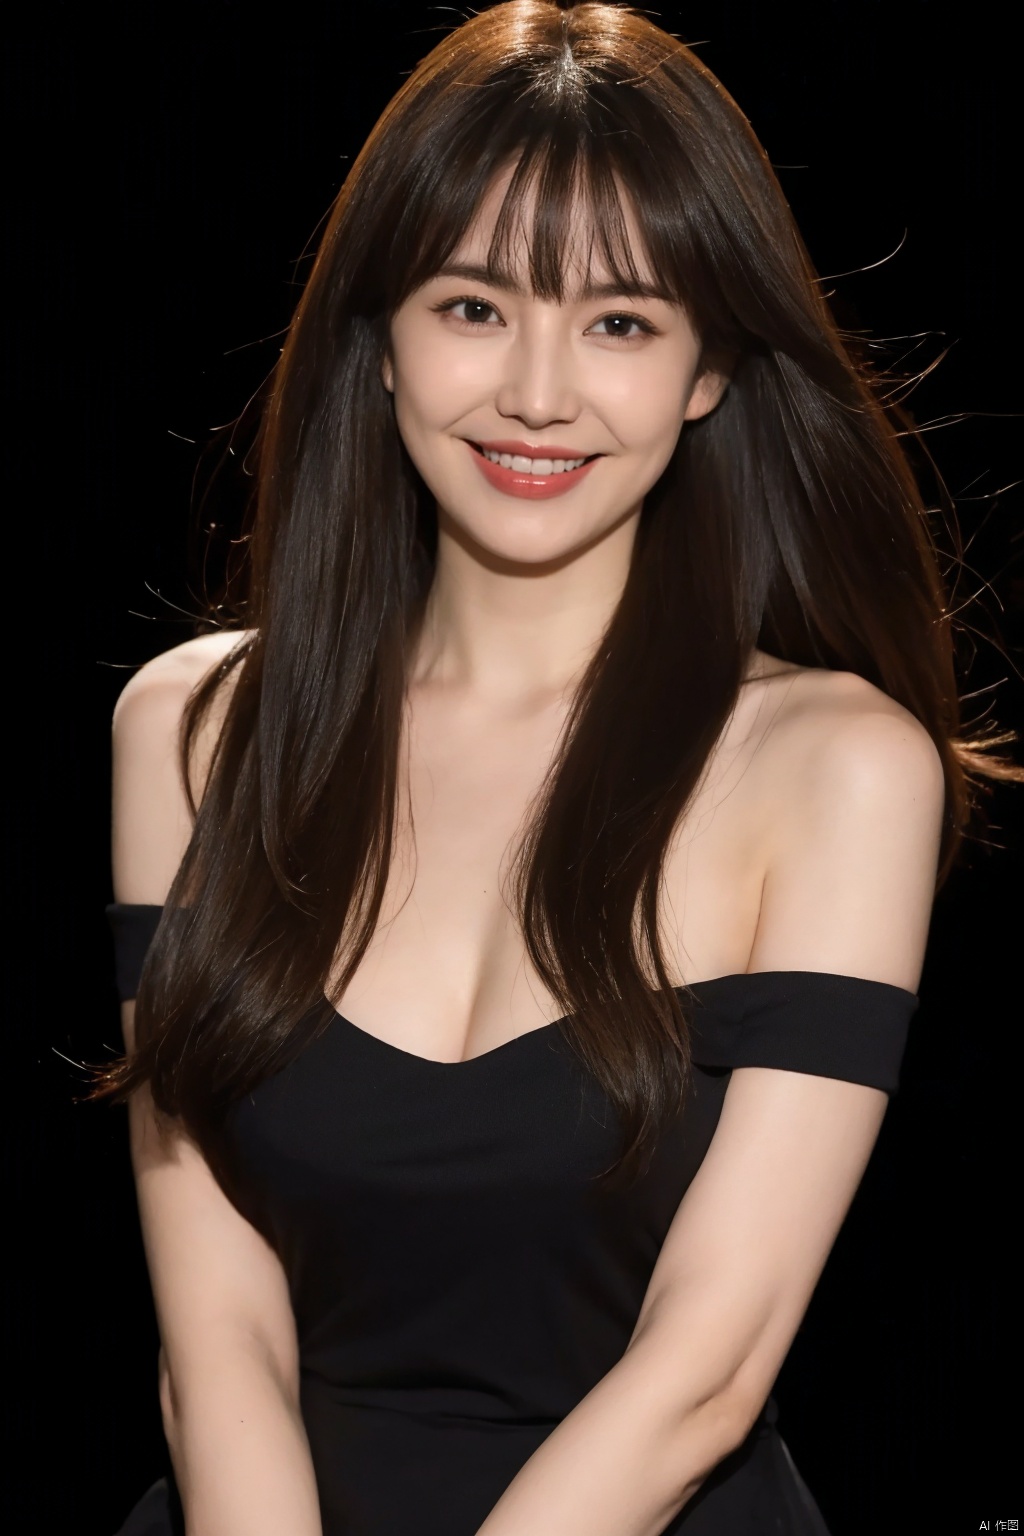  1 girl, solo, dress, black background, full body, long hair, chest, cleavage, large chest, collarbone, smile, brown hair, bangs, short sleeves, front